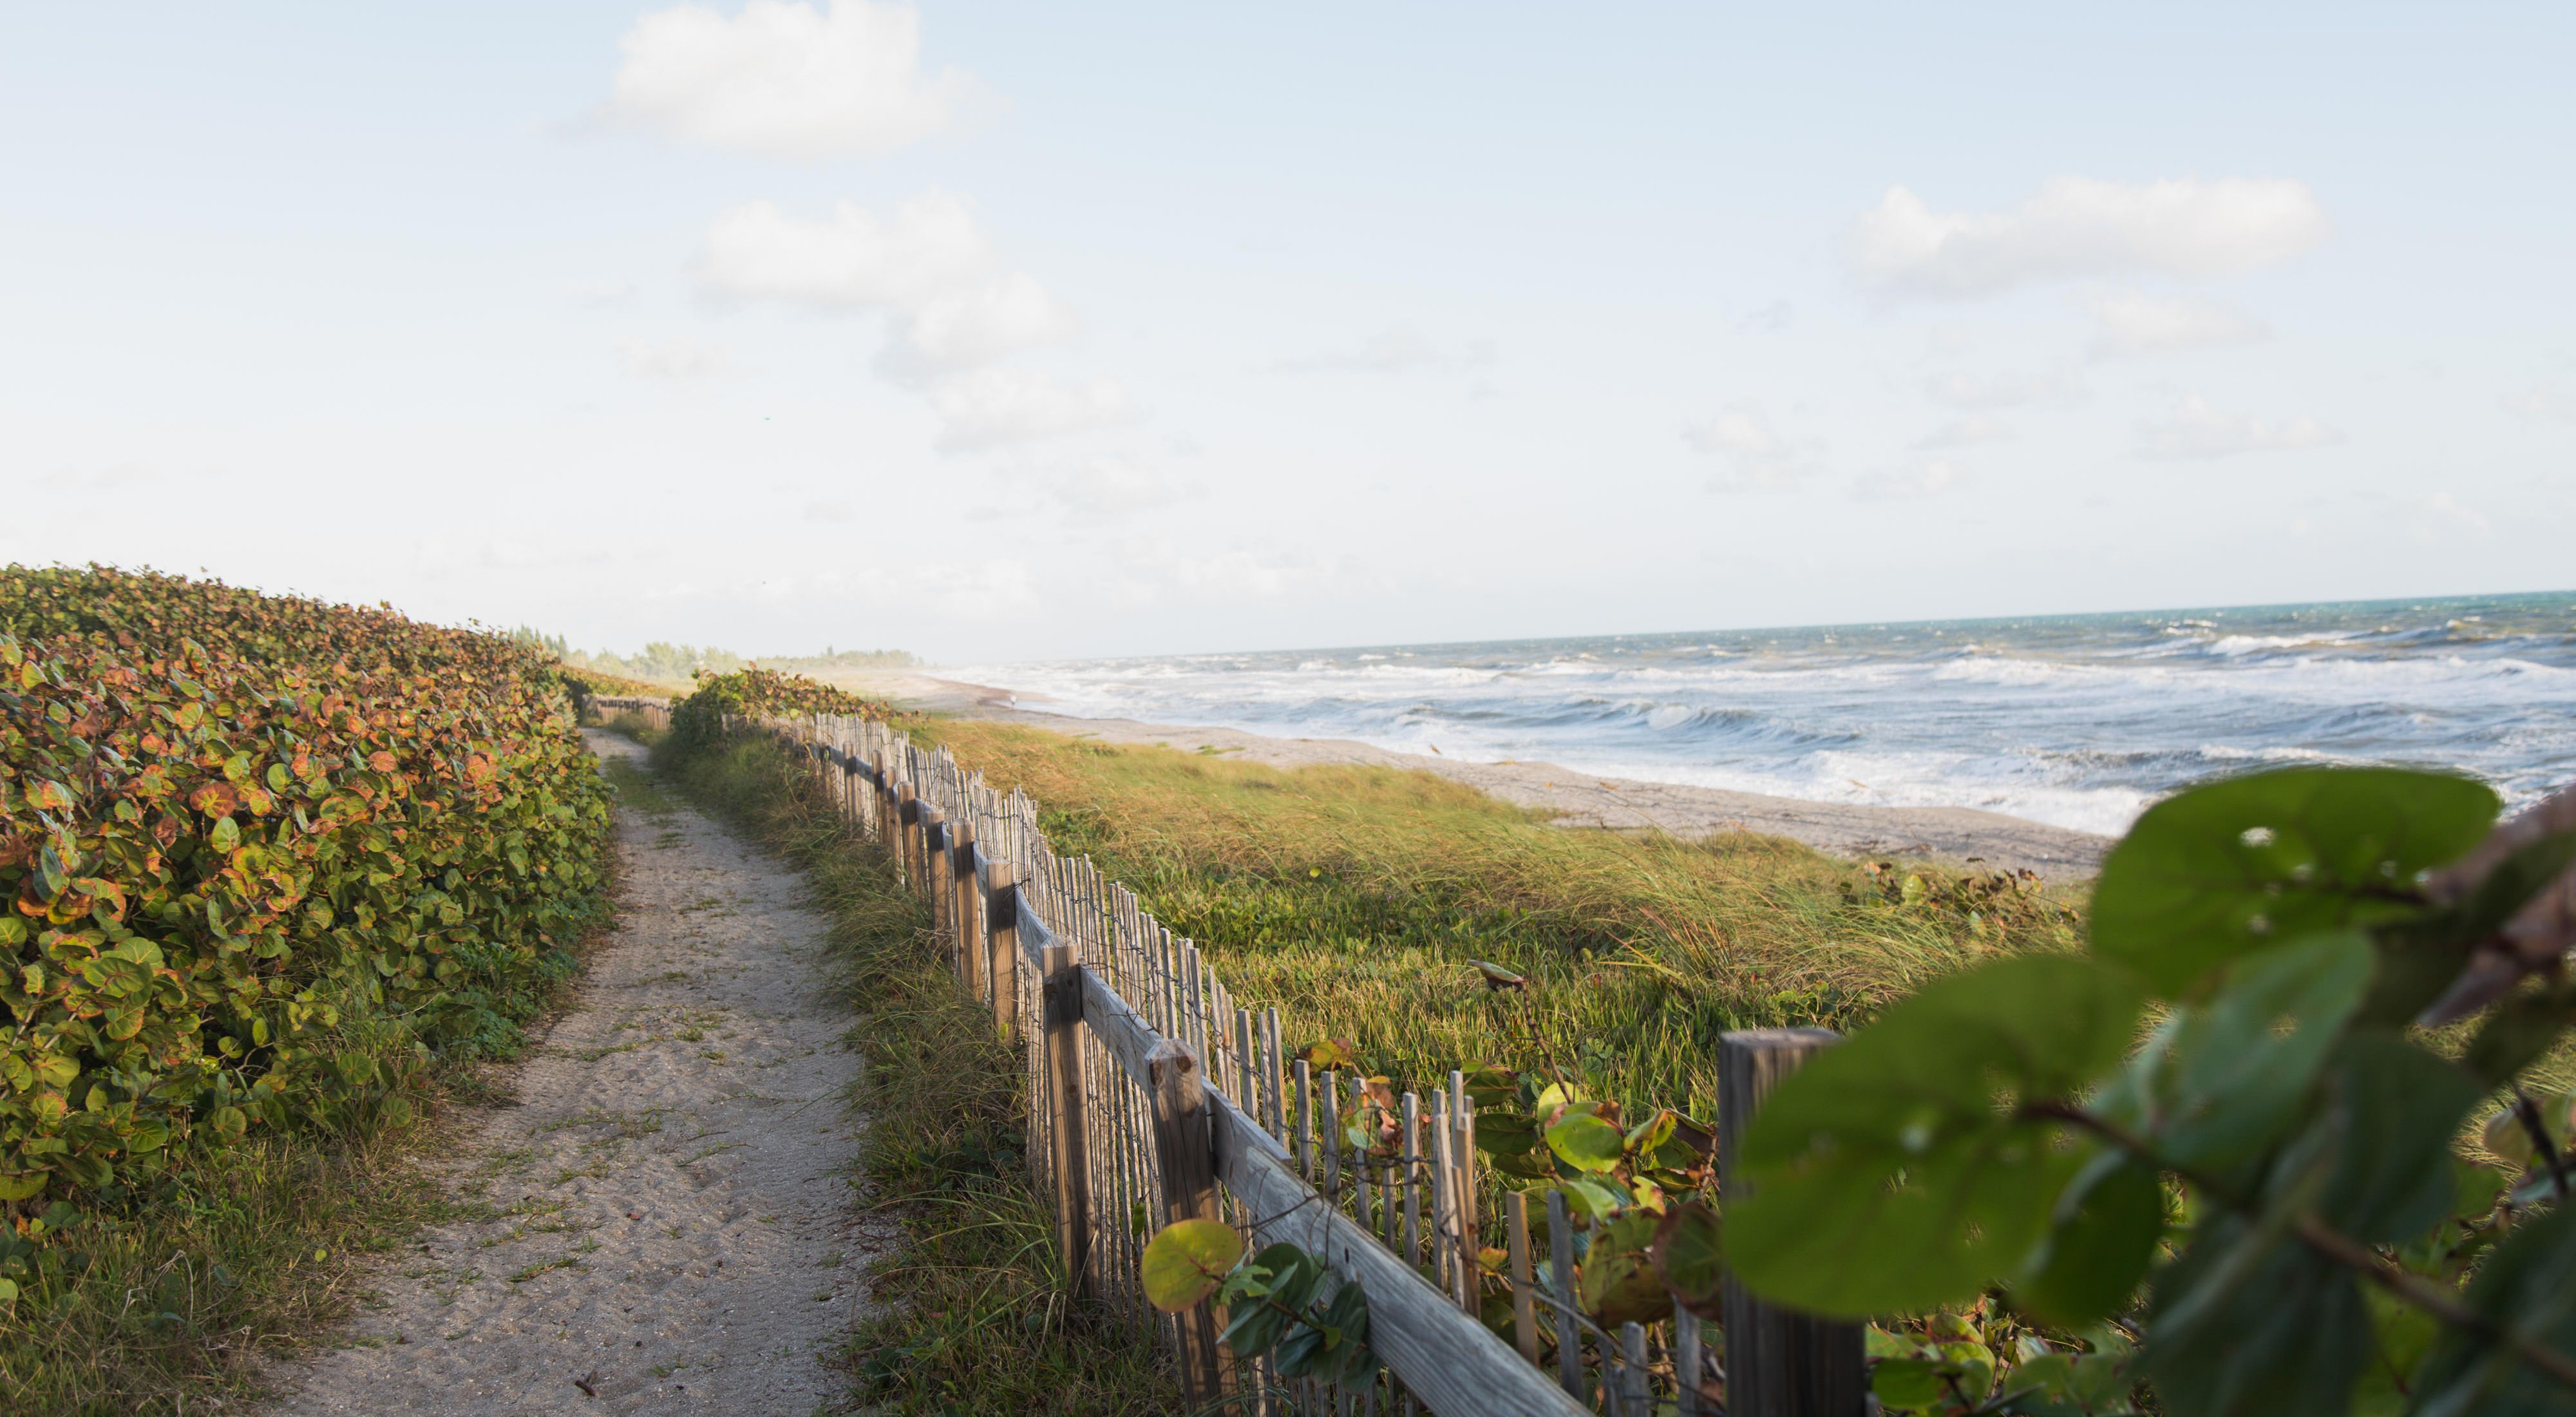 A dune trail at The Nature Conservancy's Blowing Rocks Preserve on Jupiter Island, Florida.